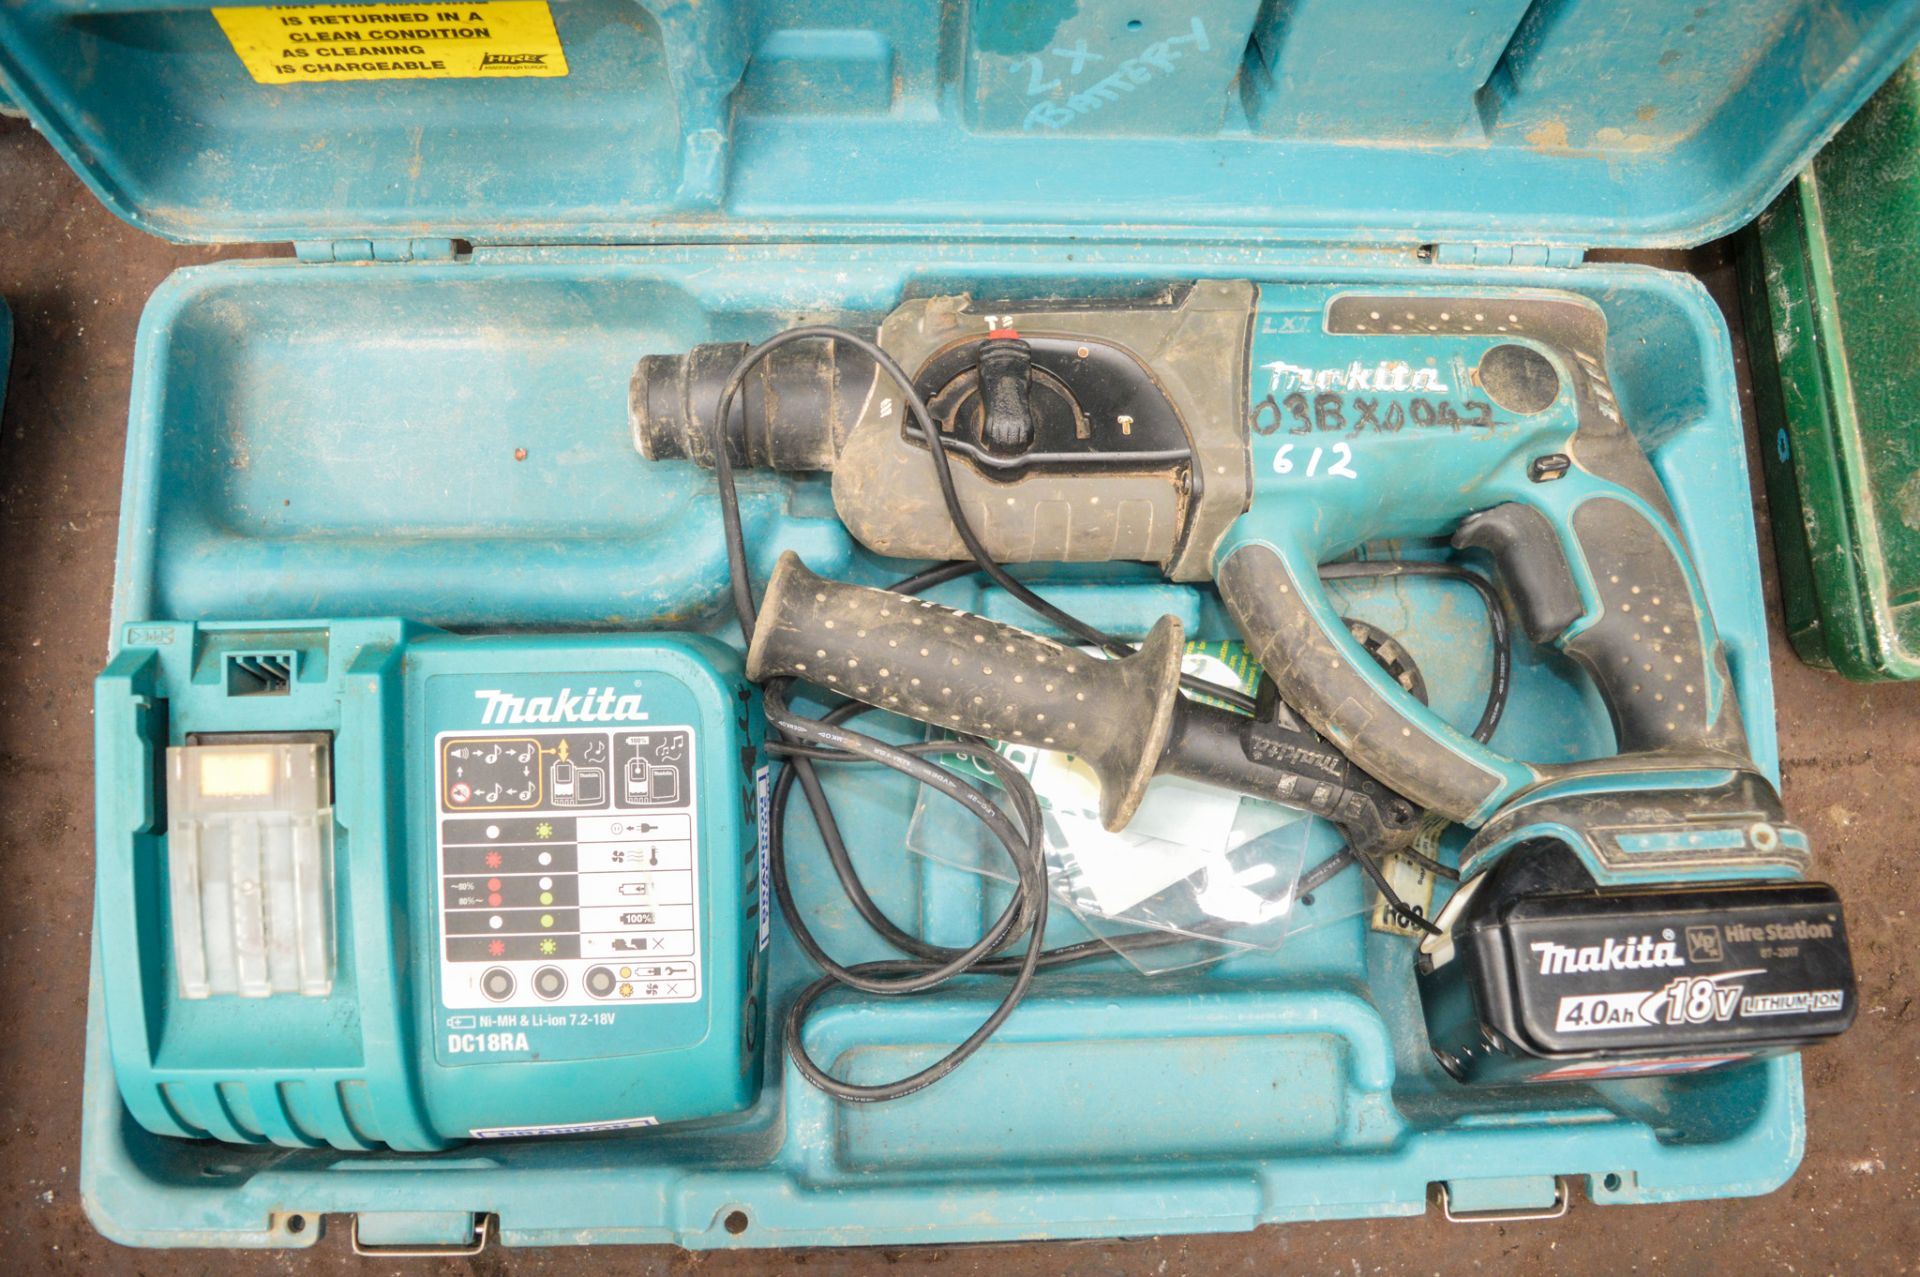 Makita 18v cordless SDS rotary hammer drill c/w charger, battery & carry case 1205-0722